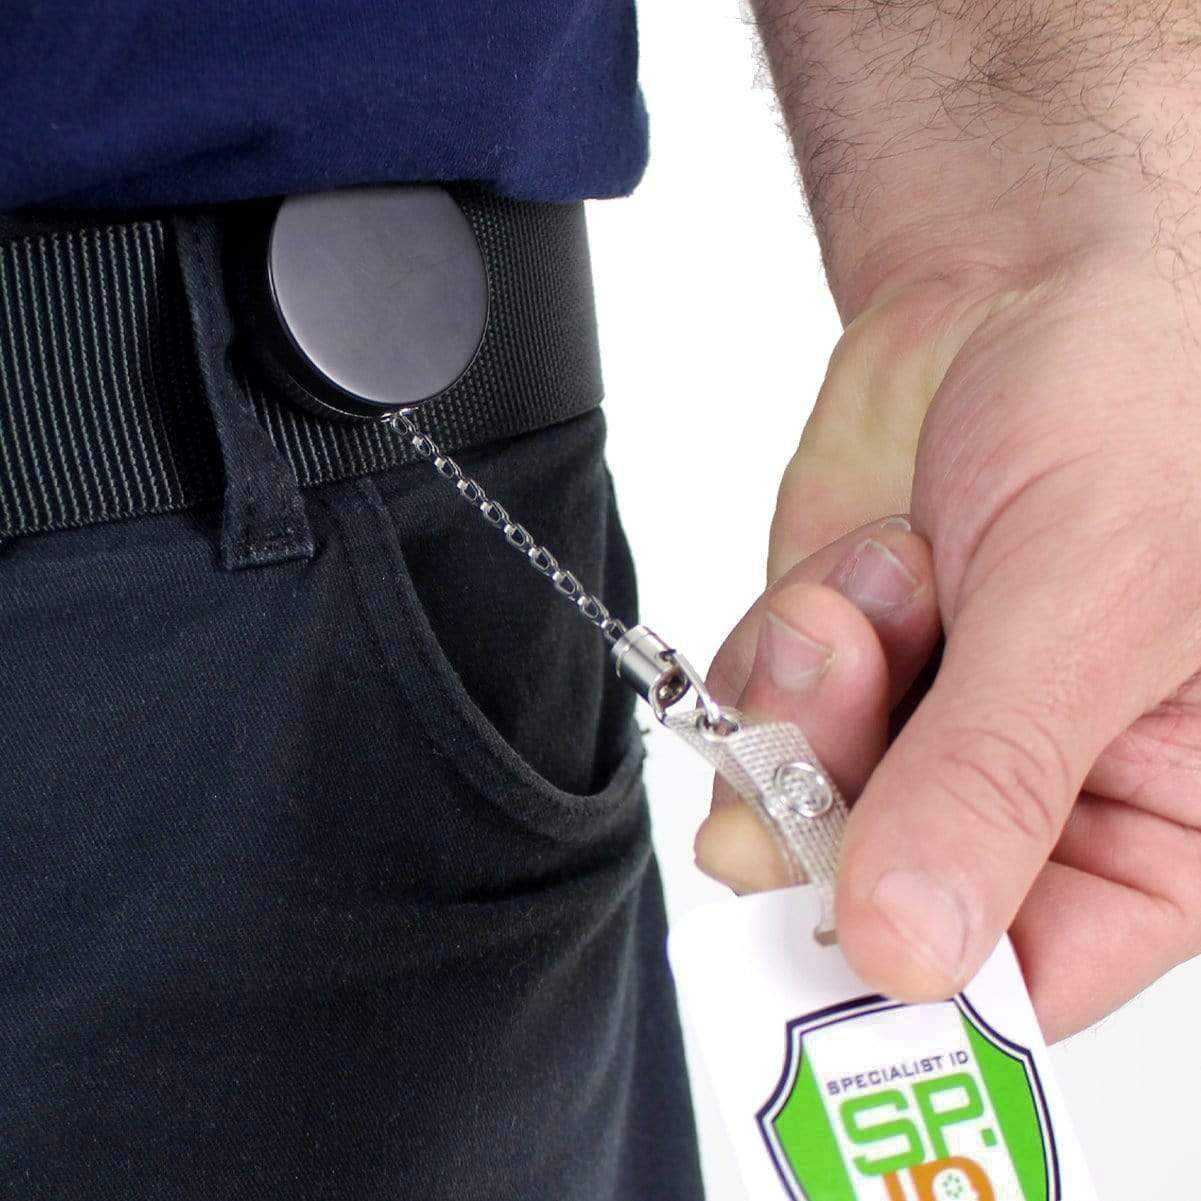 A person wearing a black belt clips a Heavy Duty Badge Reel With Chain (P/N 2120-3375) to their belt loop, holding an ID card with a Specialist ID logo.